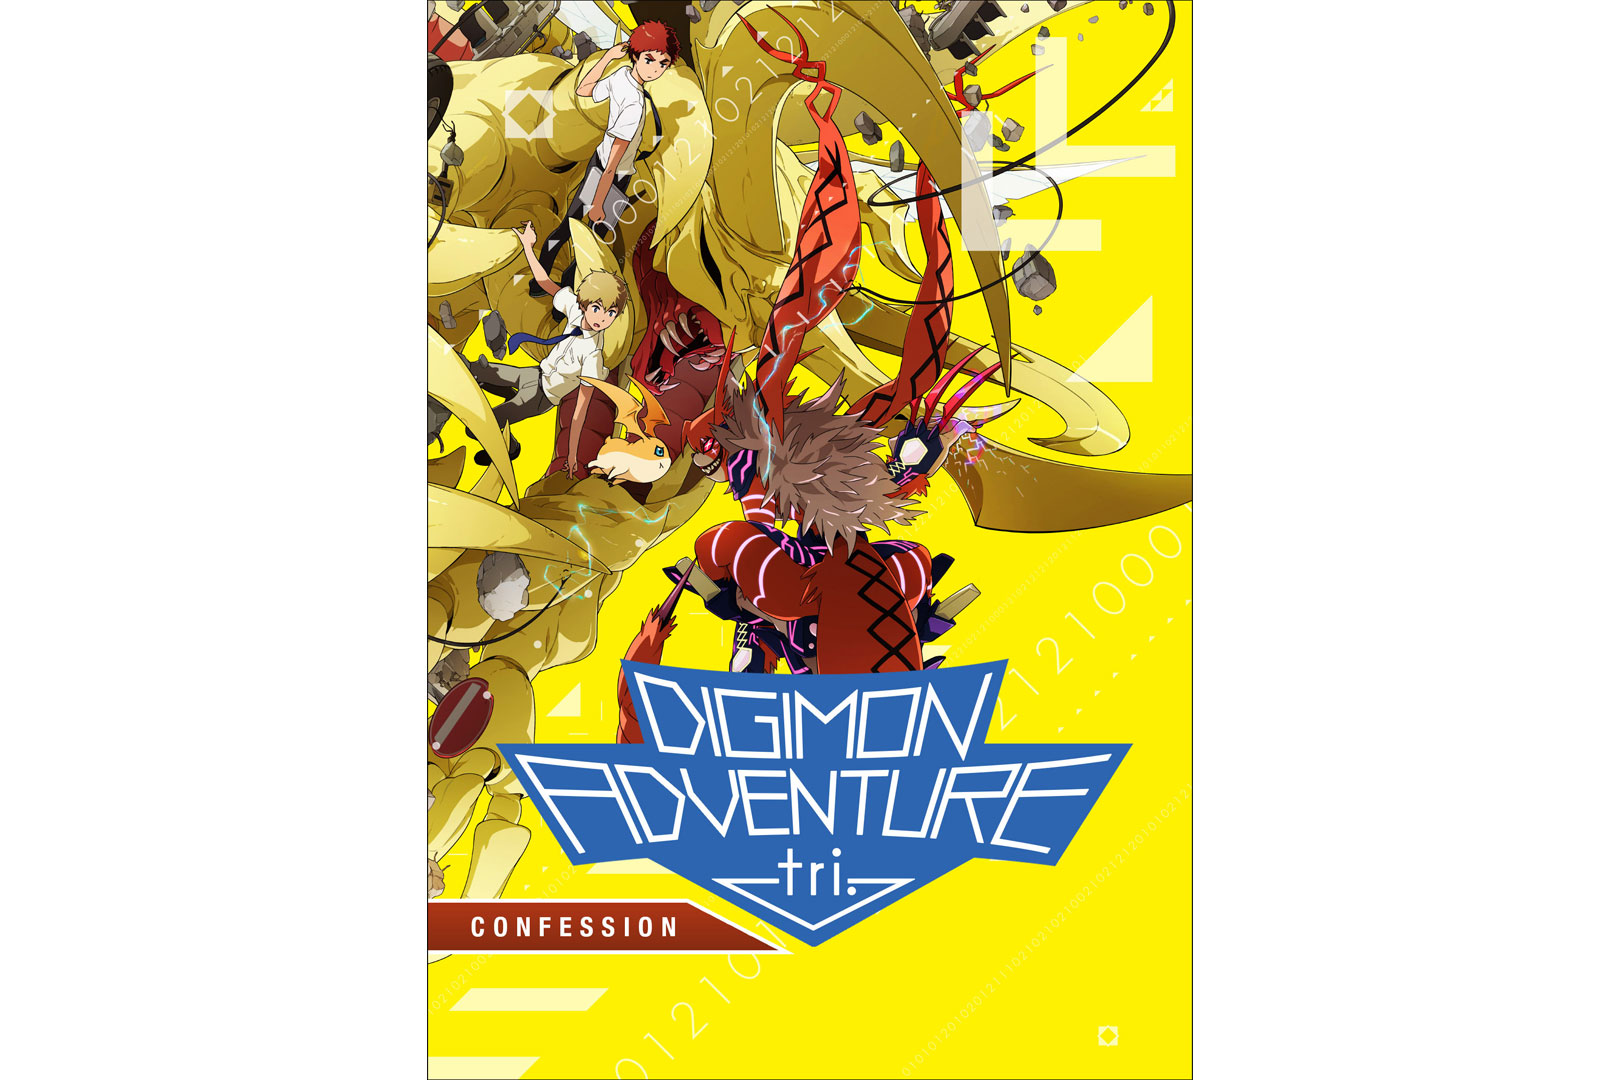 SHOUT! FACTORY AND TOEI ANIMATION PRESENT ENGLISH DUB PREMIERE SCREENING OF HIGHLY-ANTICIPATED NEW MOVIE ADVENTURE FROM DIGIMON ANIME FEATURE FILM SERIES